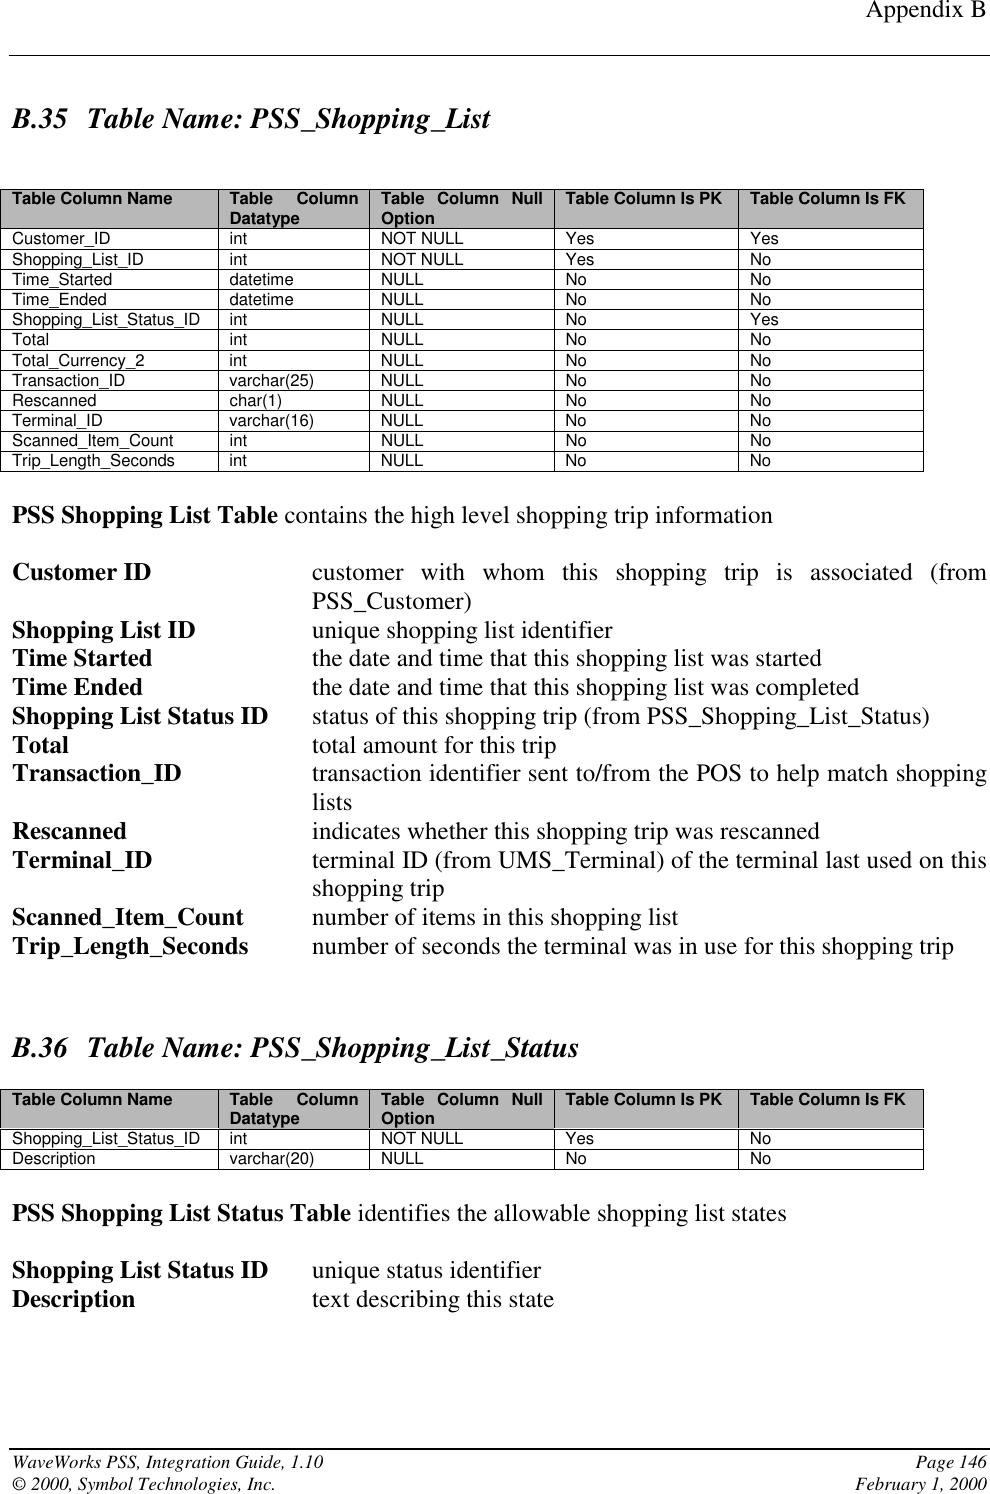 Appendix BWaveWorks PSS, Integration Guide, 1.10 Page 146© 2000, Symbol Technologies, Inc. February 1, 2000B.35 Table Name: PSS_Shopping_ListTable Column Name Table ColumnDatatype Table Column NullOption Table Column Is PK Table Column Is FKCustomer_ID int NOT NULL Yes YesShopping_List_ID int NOT NULL Yes NoTime_Started datetime NULL No NoTime_Ended datetime NULL No NoShopping_List_Status_ID int NULL No YesTotal int NULL No NoTotal_Currency_2 int NULL No NoTransaction_ID varchar(25) NULL No NoRescanned char(1) NULL No NoTerminal_ID varchar(16) NULL No NoScanned_Item_Count int NULL No NoTrip_Length_Seconds int NULL No NoPSS Shopping List Table contains the high level shopping trip informationCustomer ID customer with whom this shopping trip is associated (fromPSS_Customer)Shopping List ID unique shopping list identifierTime Started the date and time that this shopping list was startedTime Ended the date and time that this shopping list was completedShopping List Status ID status of this shopping trip (from PSS_Shopping_List_Status)Total total amount for this tripTransaction_ID transaction identifier sent to/from the POS to help match shoppinglistsRescanned indicates whether this shopping trip was rescannedTerminal_ID terminal ID (from UMS_Terminal) of the terminal last used on thisshopping tripScanned_Item_Count number of items in this shopping listTrip_Length_Seconds number of seconds the terminal was in use for this shopping tripB.36 Table Name: PSS_Shopping_List_StatusTable Column Name Table ColumnDatatype Table Column NullOption Table Column Is PK Table Column Is FKShopping_List_Status_ID int NOT NULL Yes NoDescription varchar(20) NULL No NoPSS Shopping List Status Table identifies the allowable shopping list statesShopping List Status ID unique status identifierDescription text describing this state